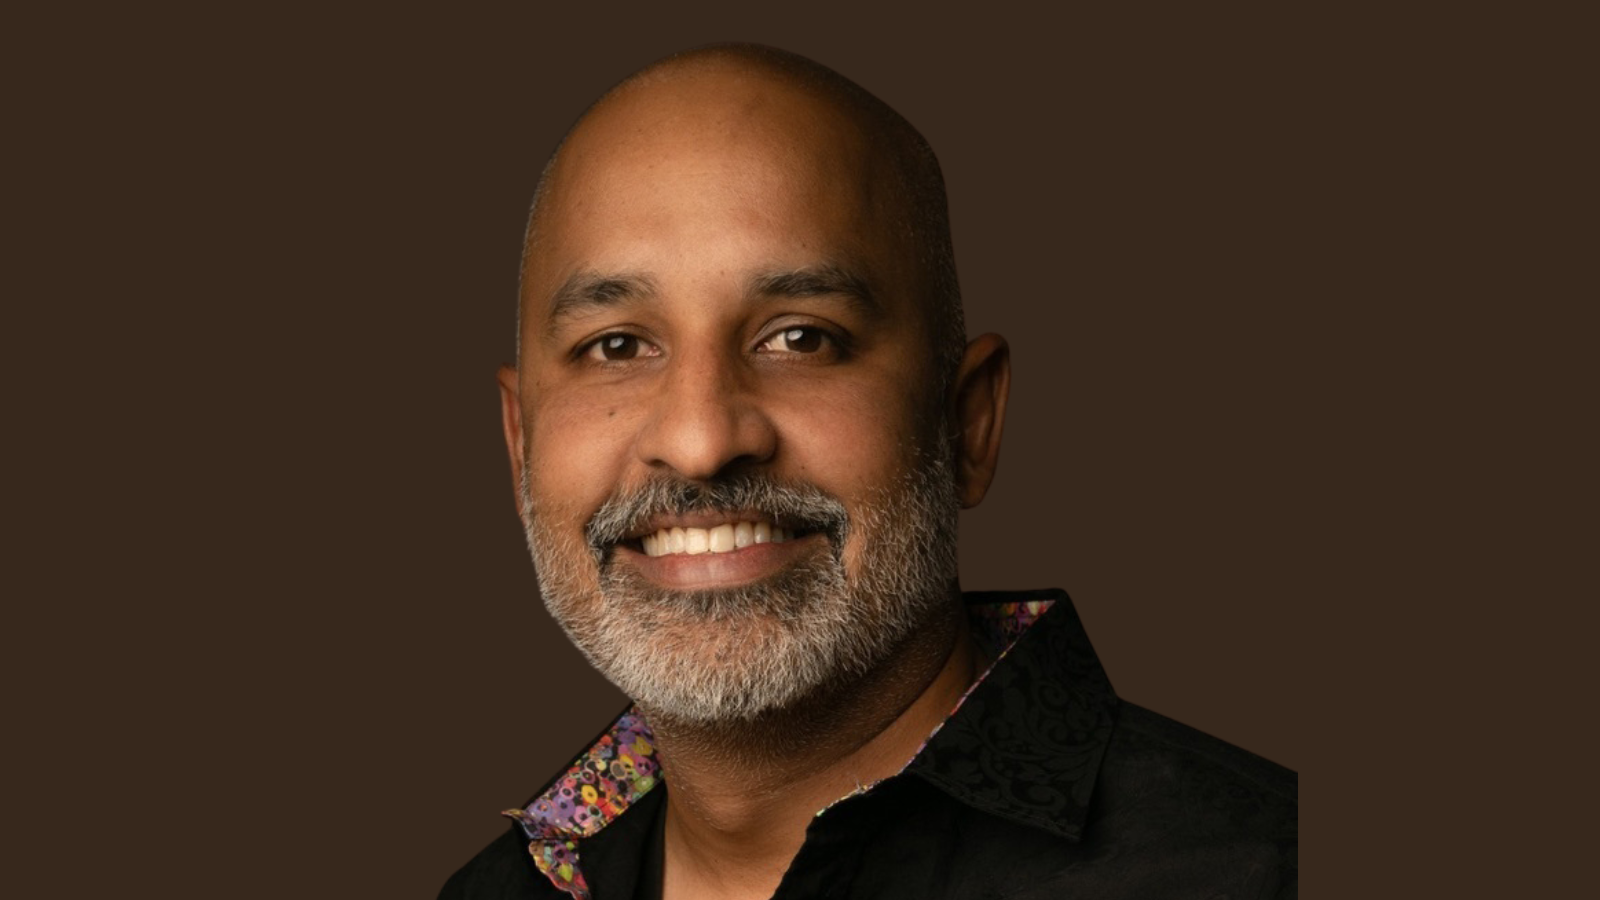 Ram Krishnan, CEO of Valant, poses for a photo